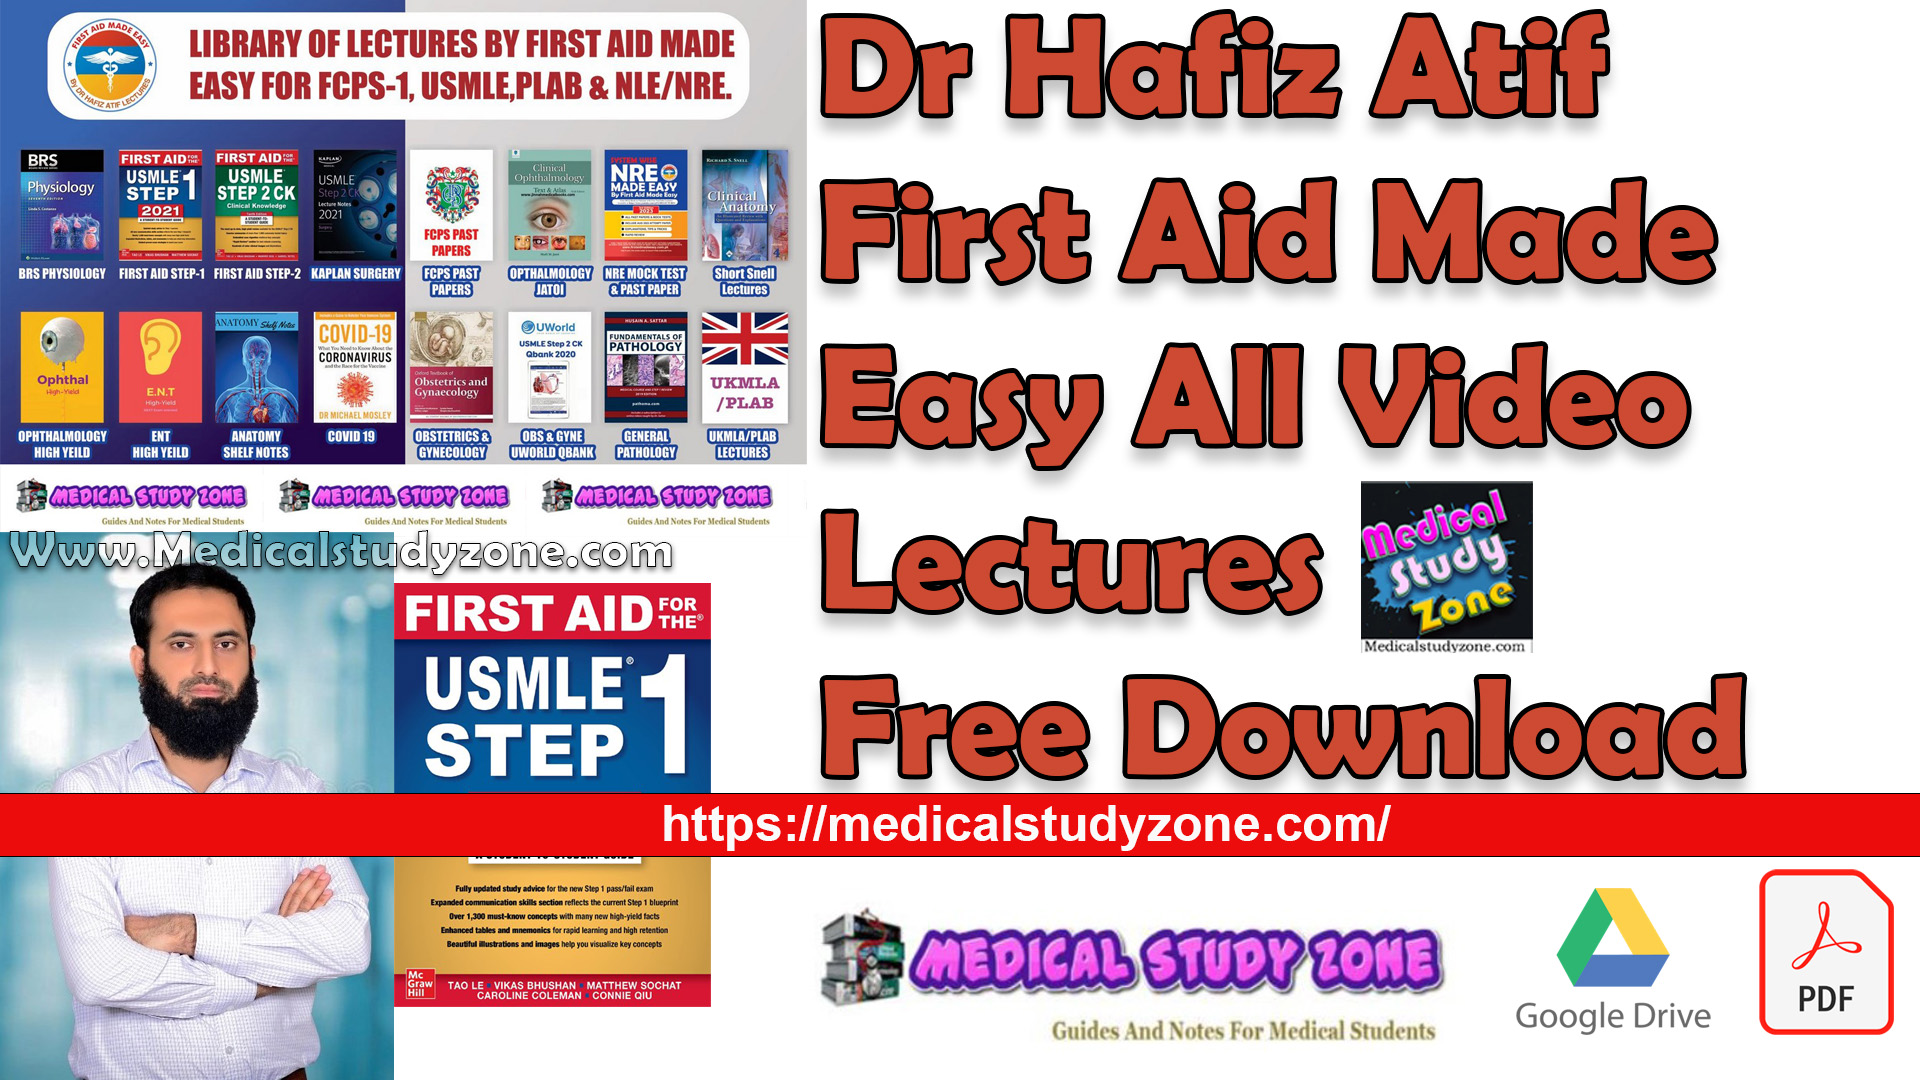 Dr Hafiz Atif First Aid Made Easy All Video Lectures Free Download